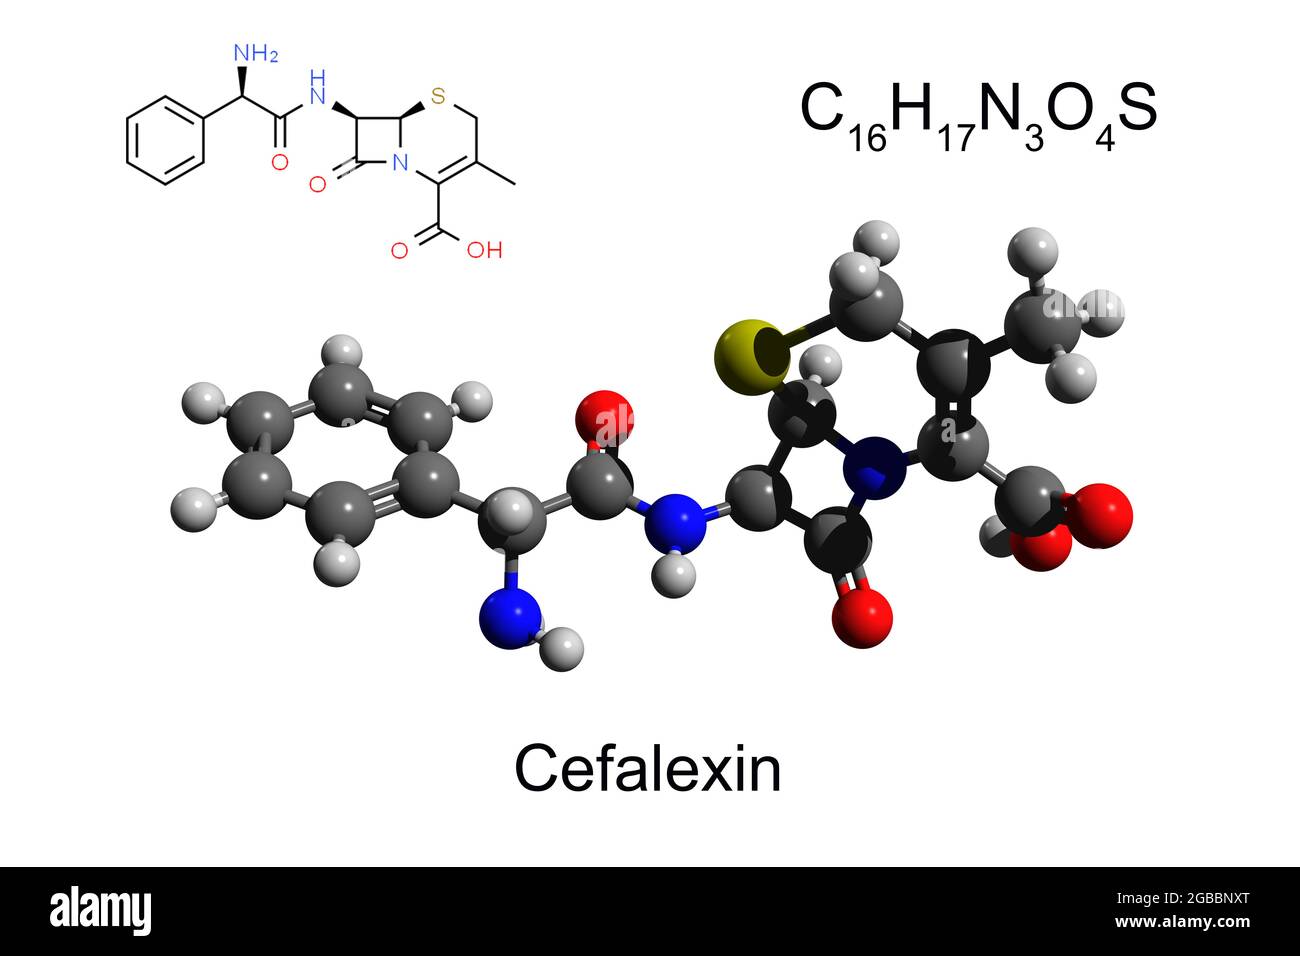 Chemical formula, structural formula and 3D ball-and-stick model of antibiotic cefalexin, white background Stock Photo